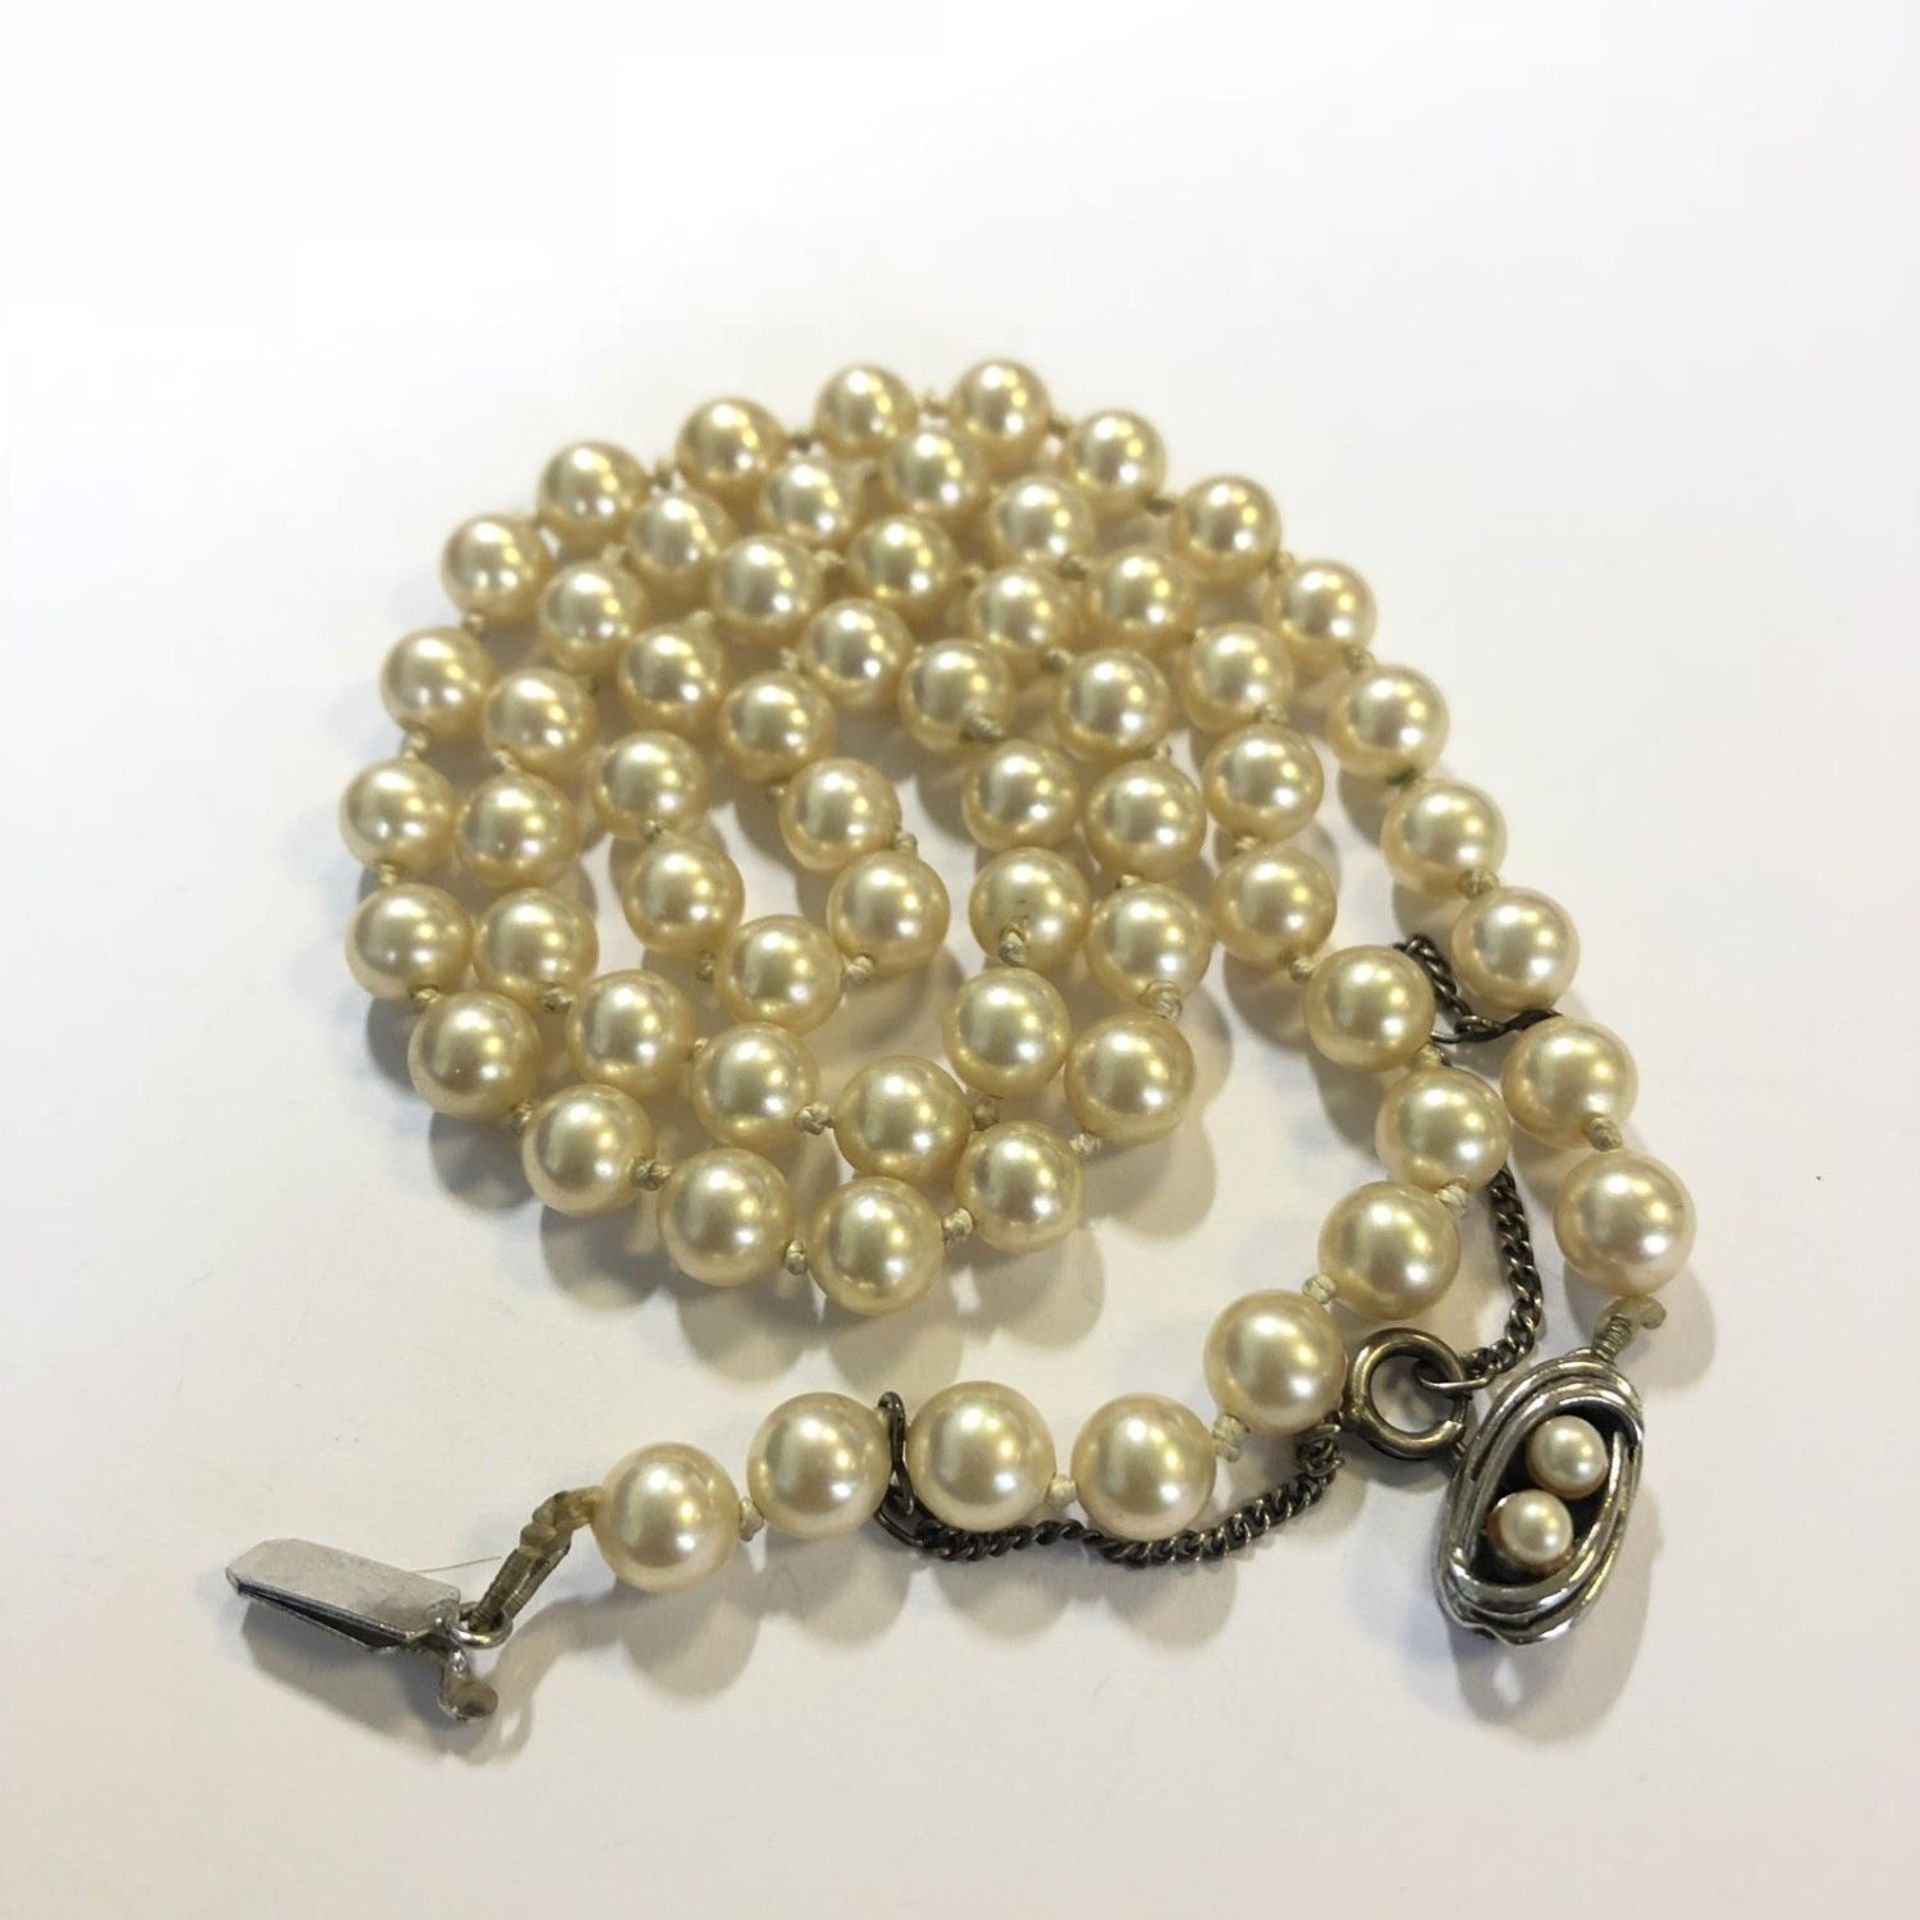 Vintage necklace - Single string strand of faux pearls on a 925 silver clasp